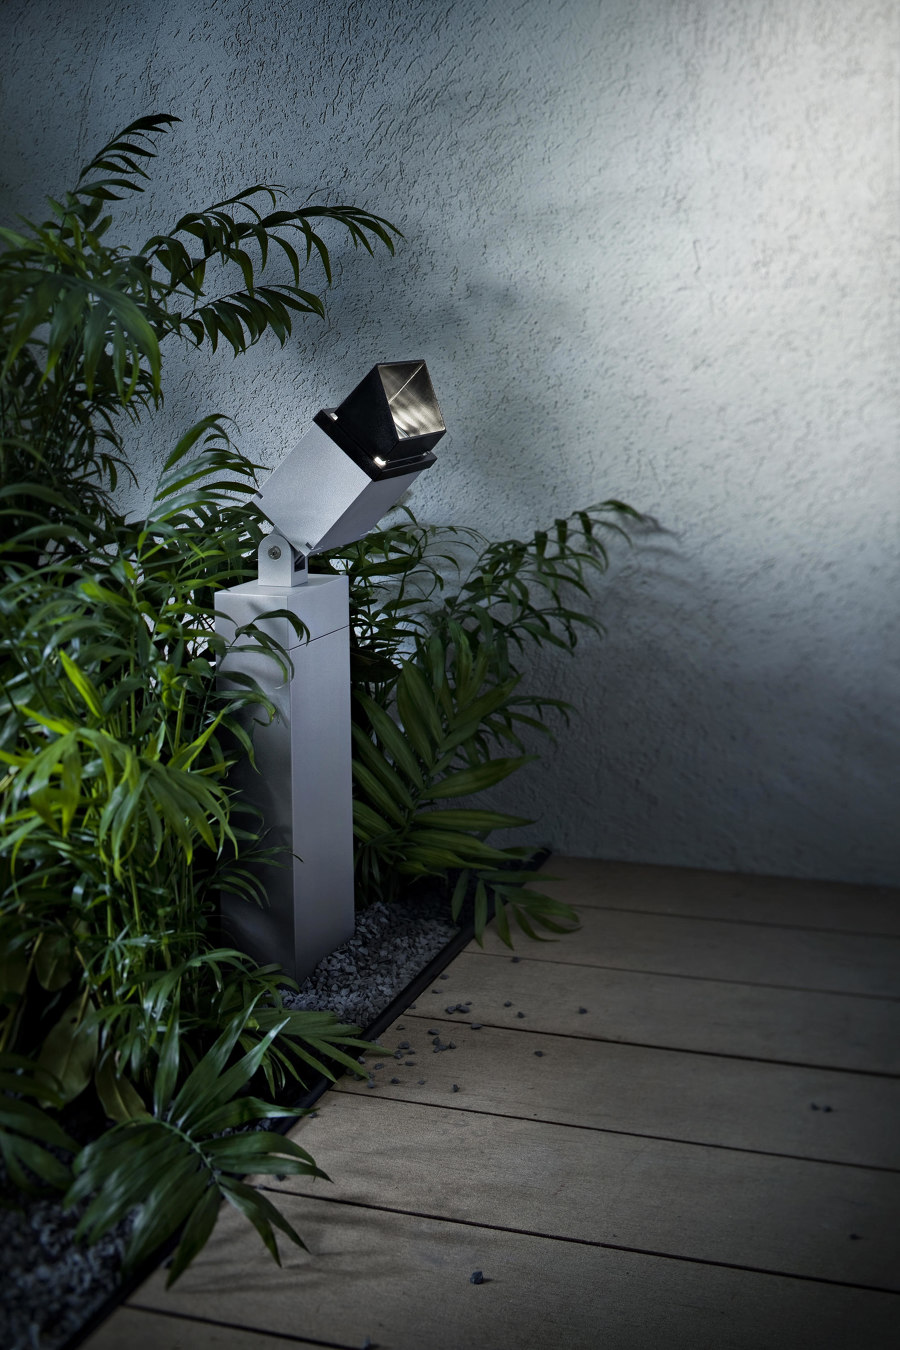 A light in the dark: six reasons to fill outdoor spaces with light | News